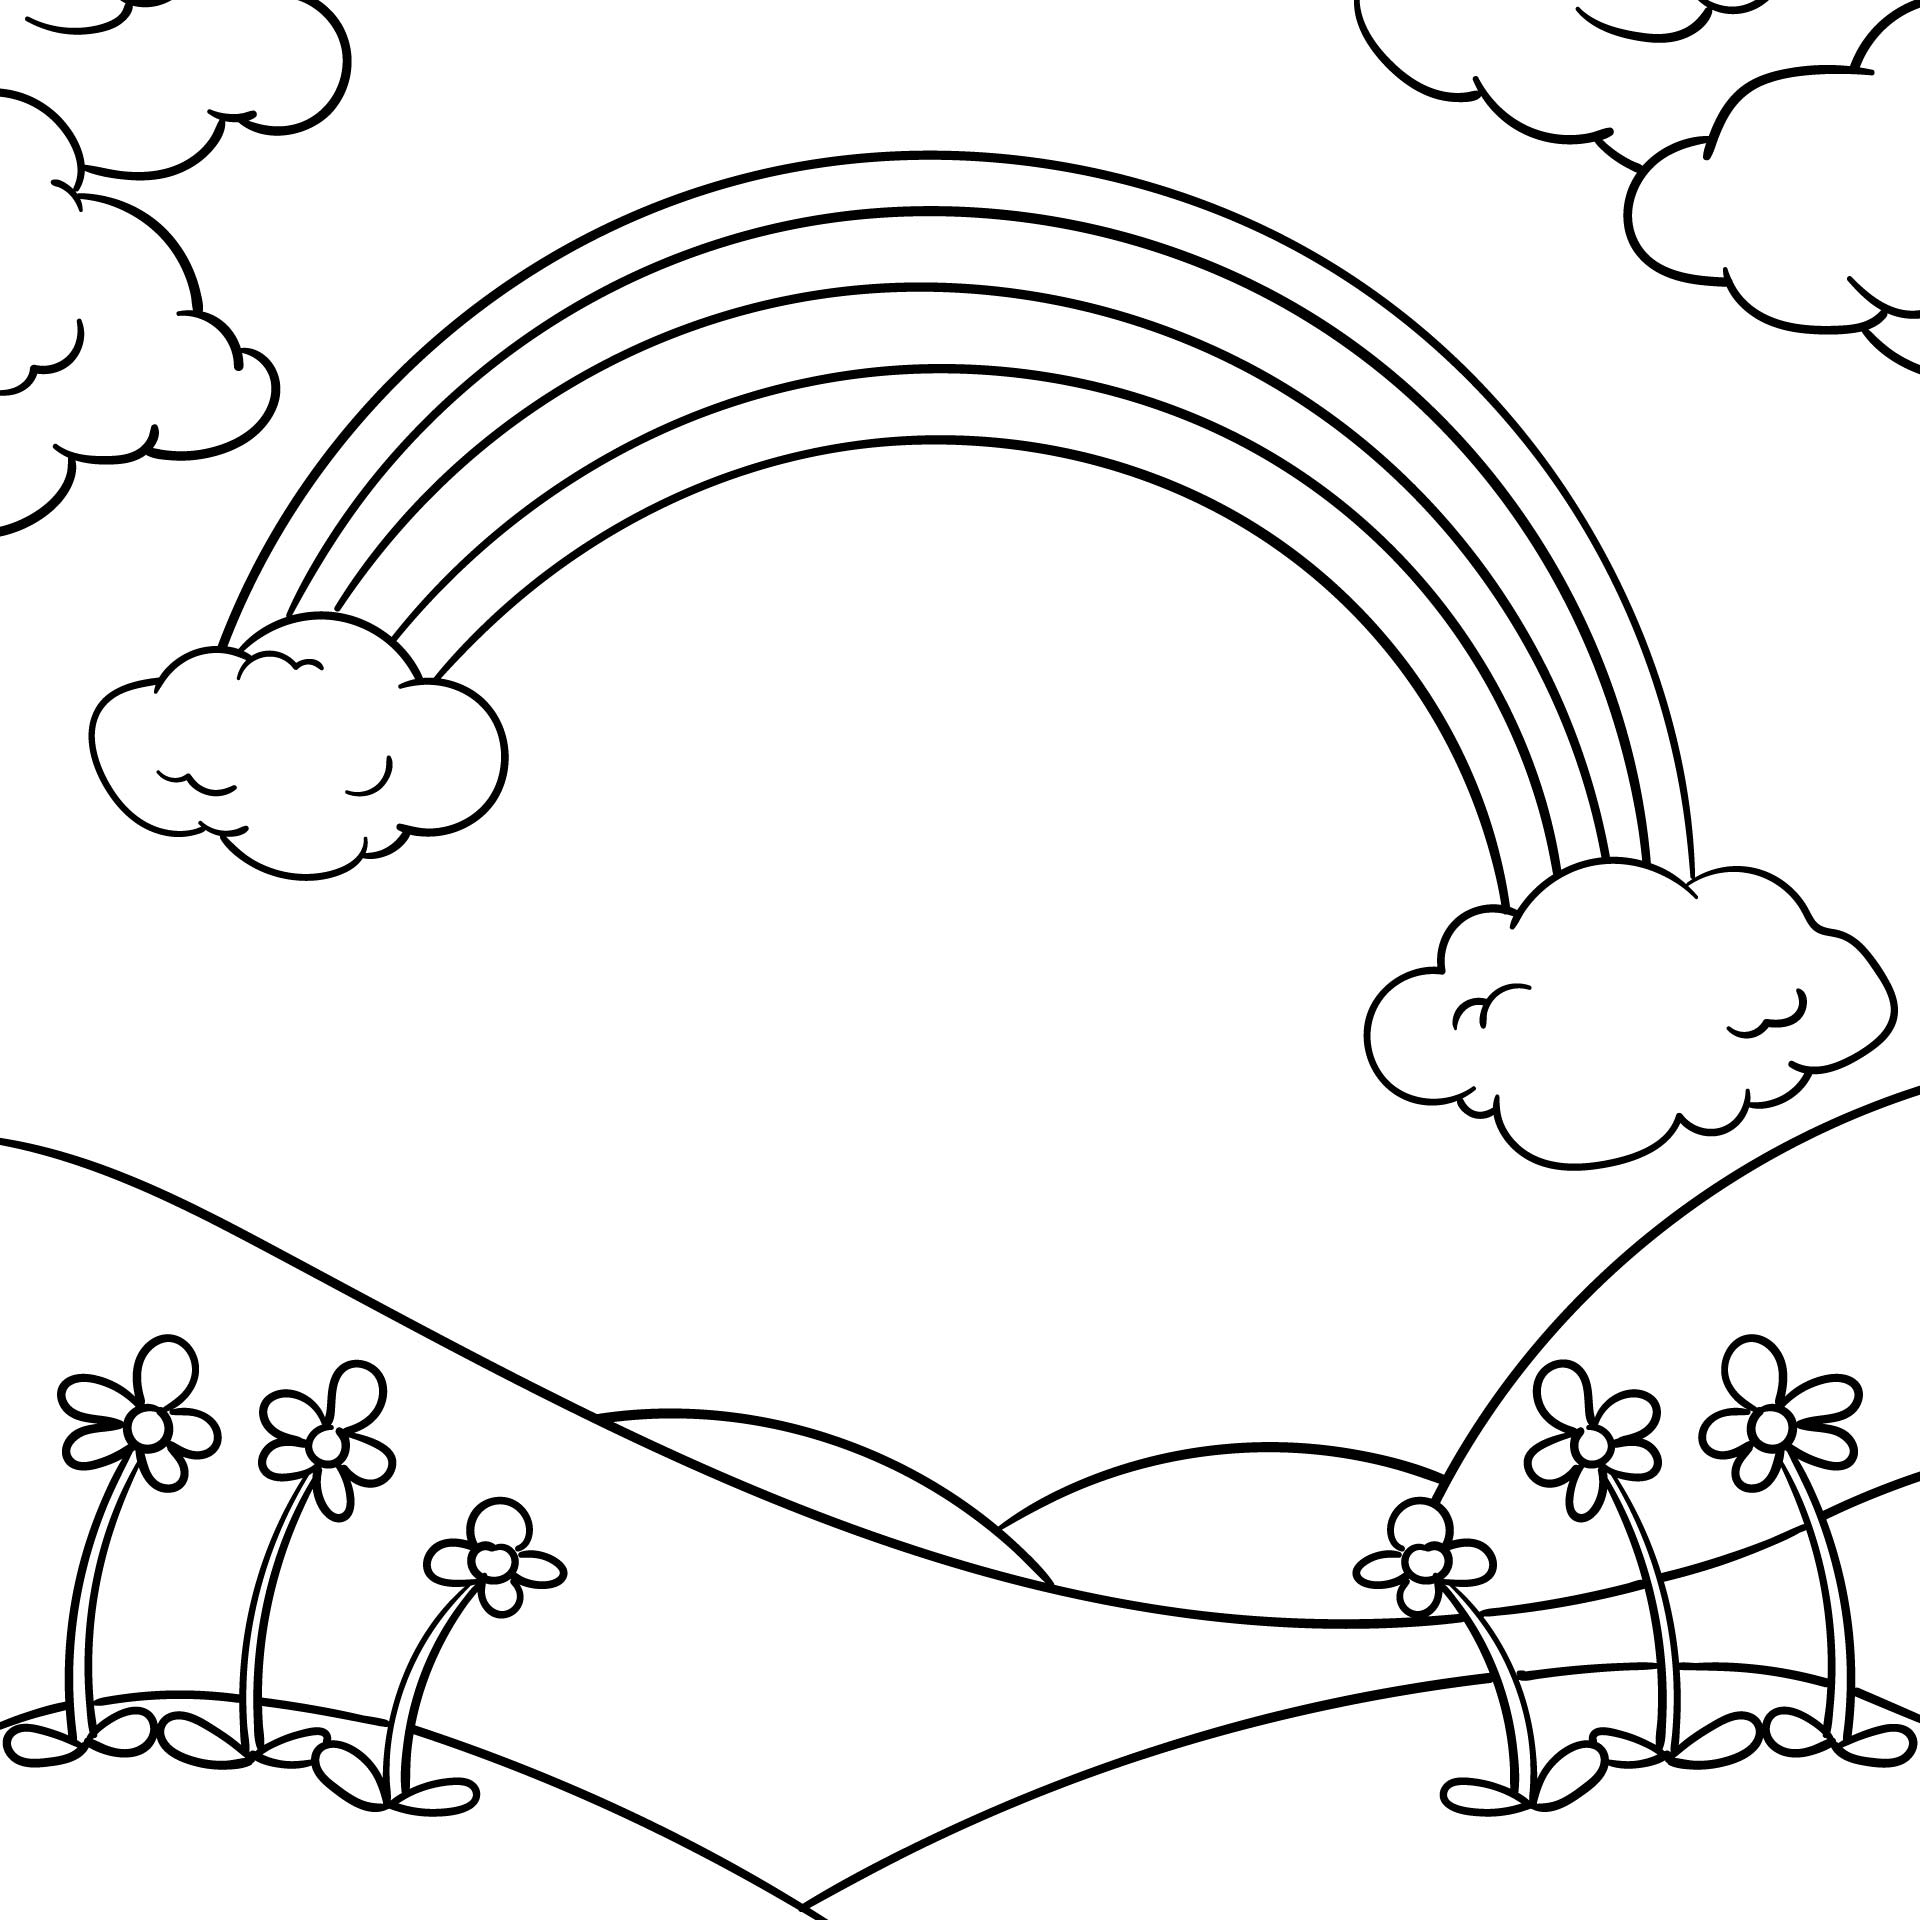 Printable Rainbows And Weather Coloring Page For Kids